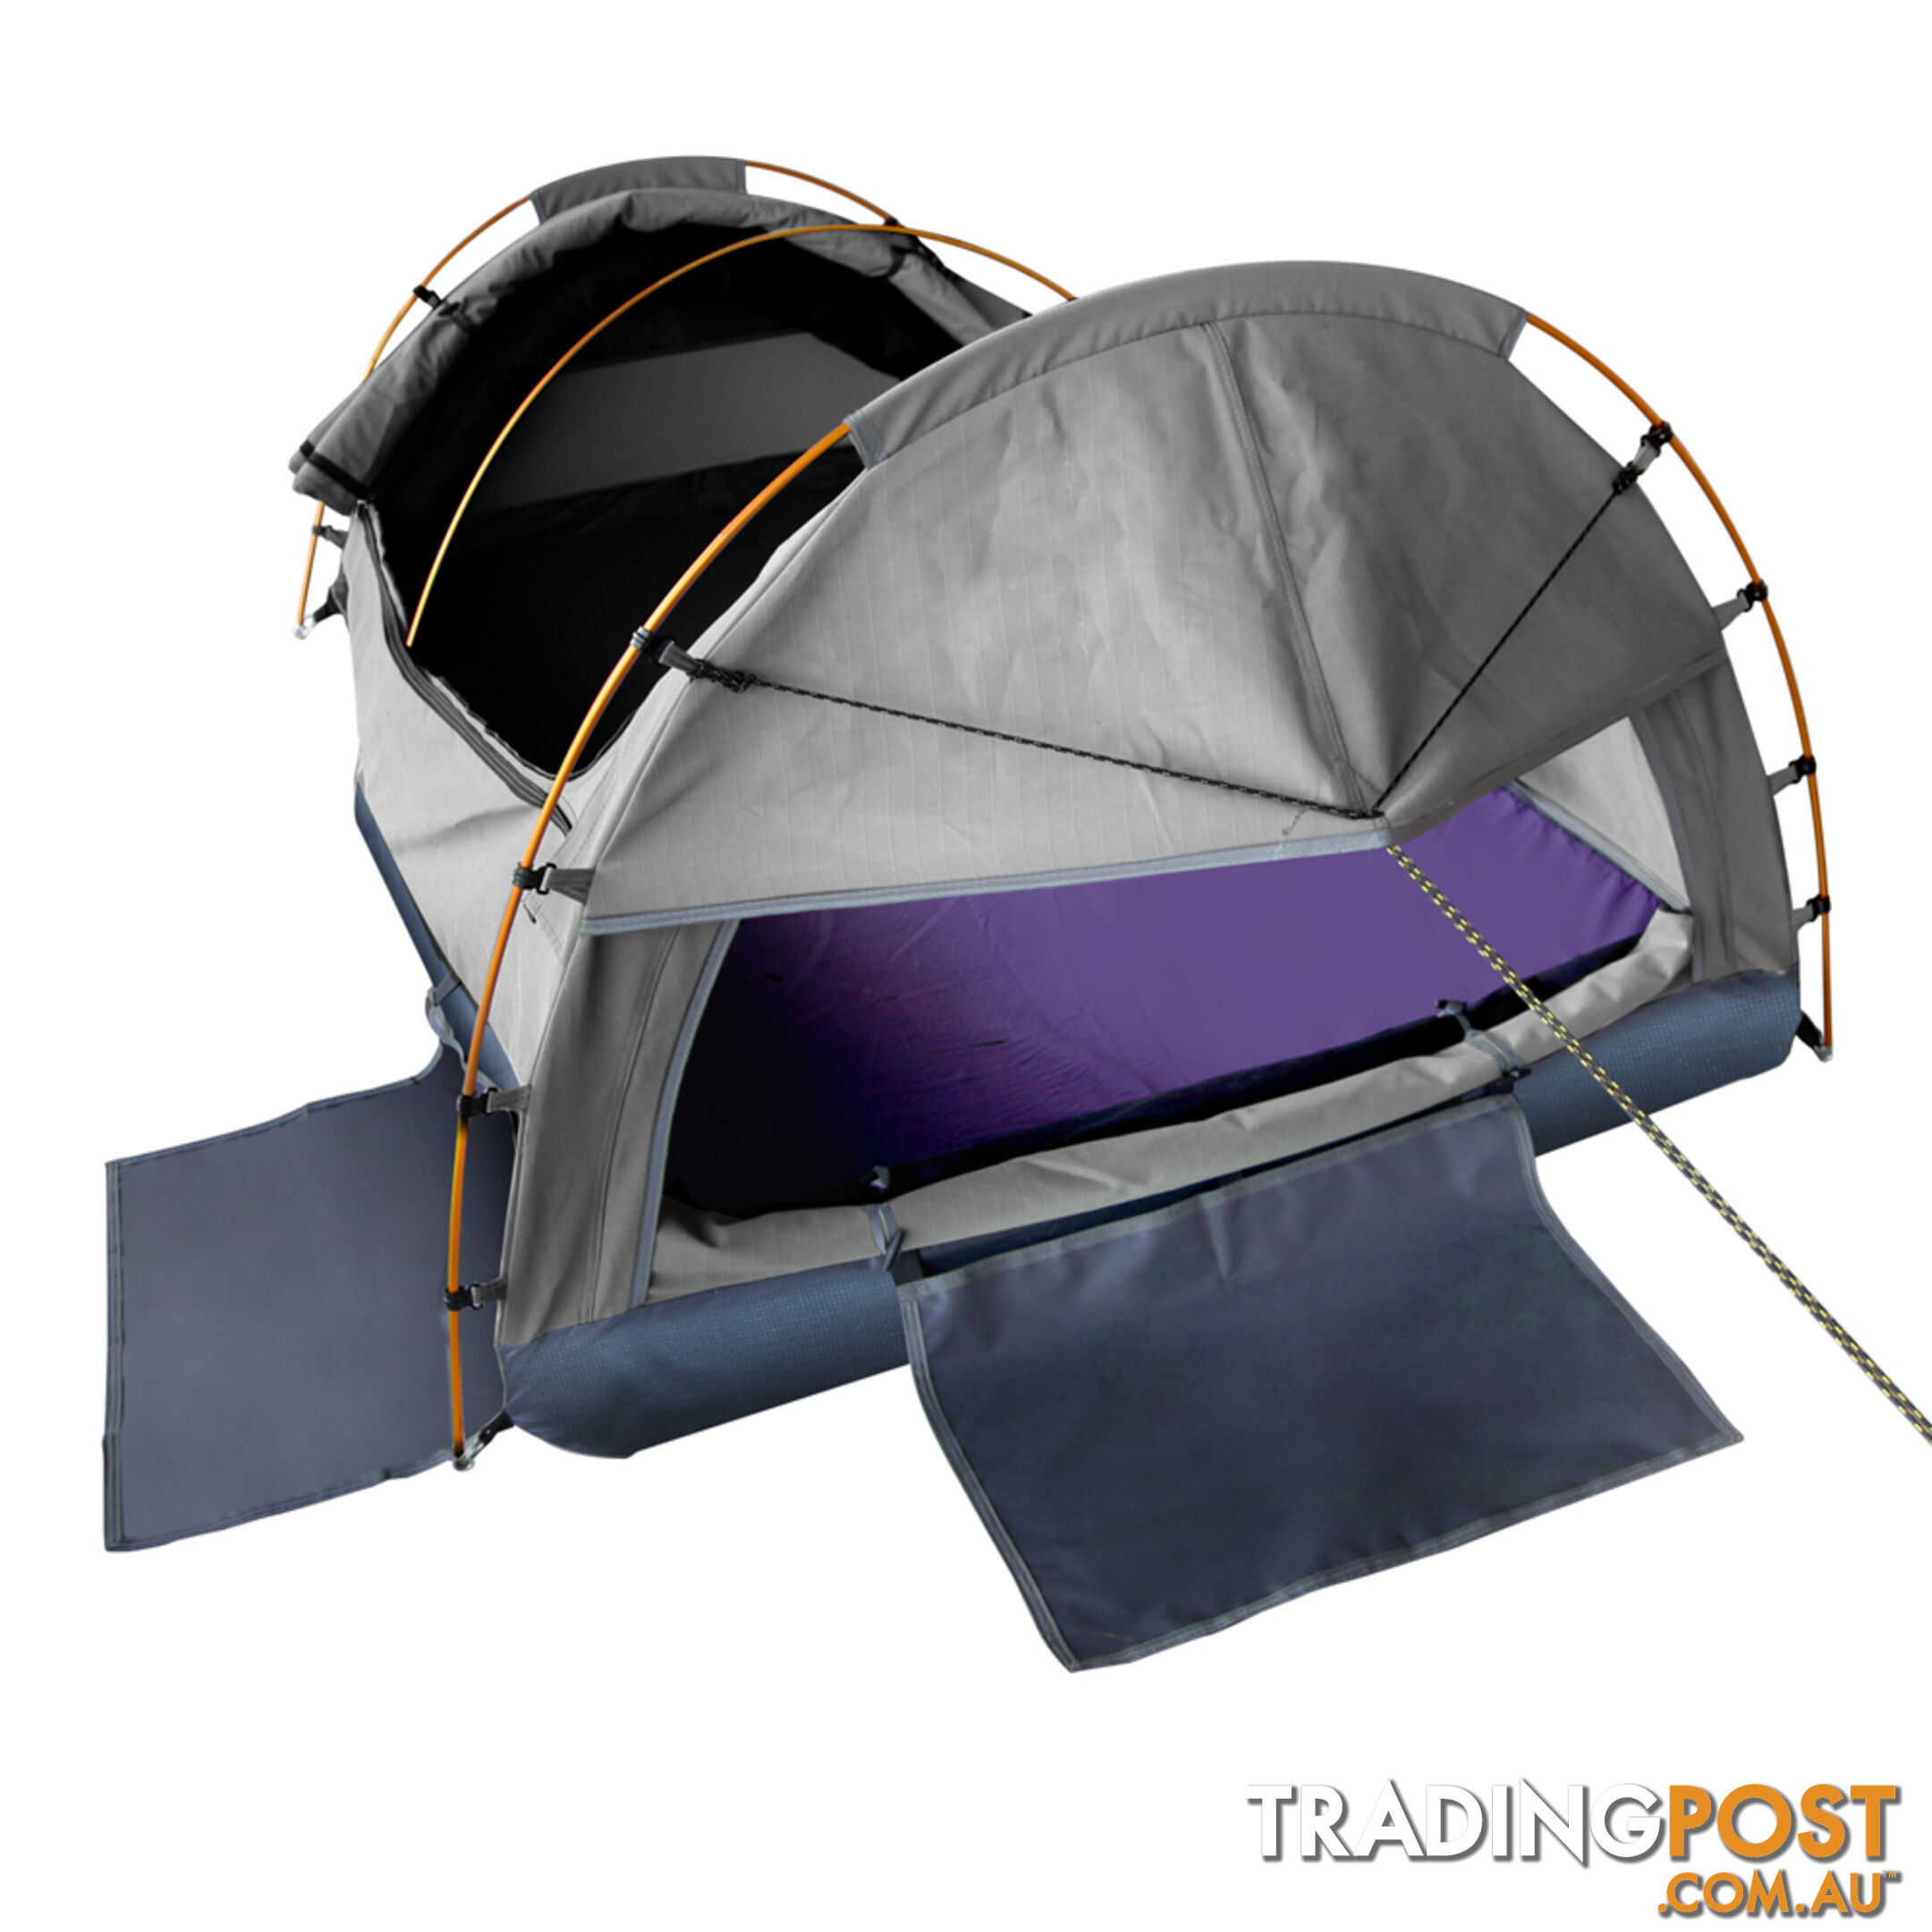 Double Camping Canvas Swag Tent Grey w/ Air Pillow